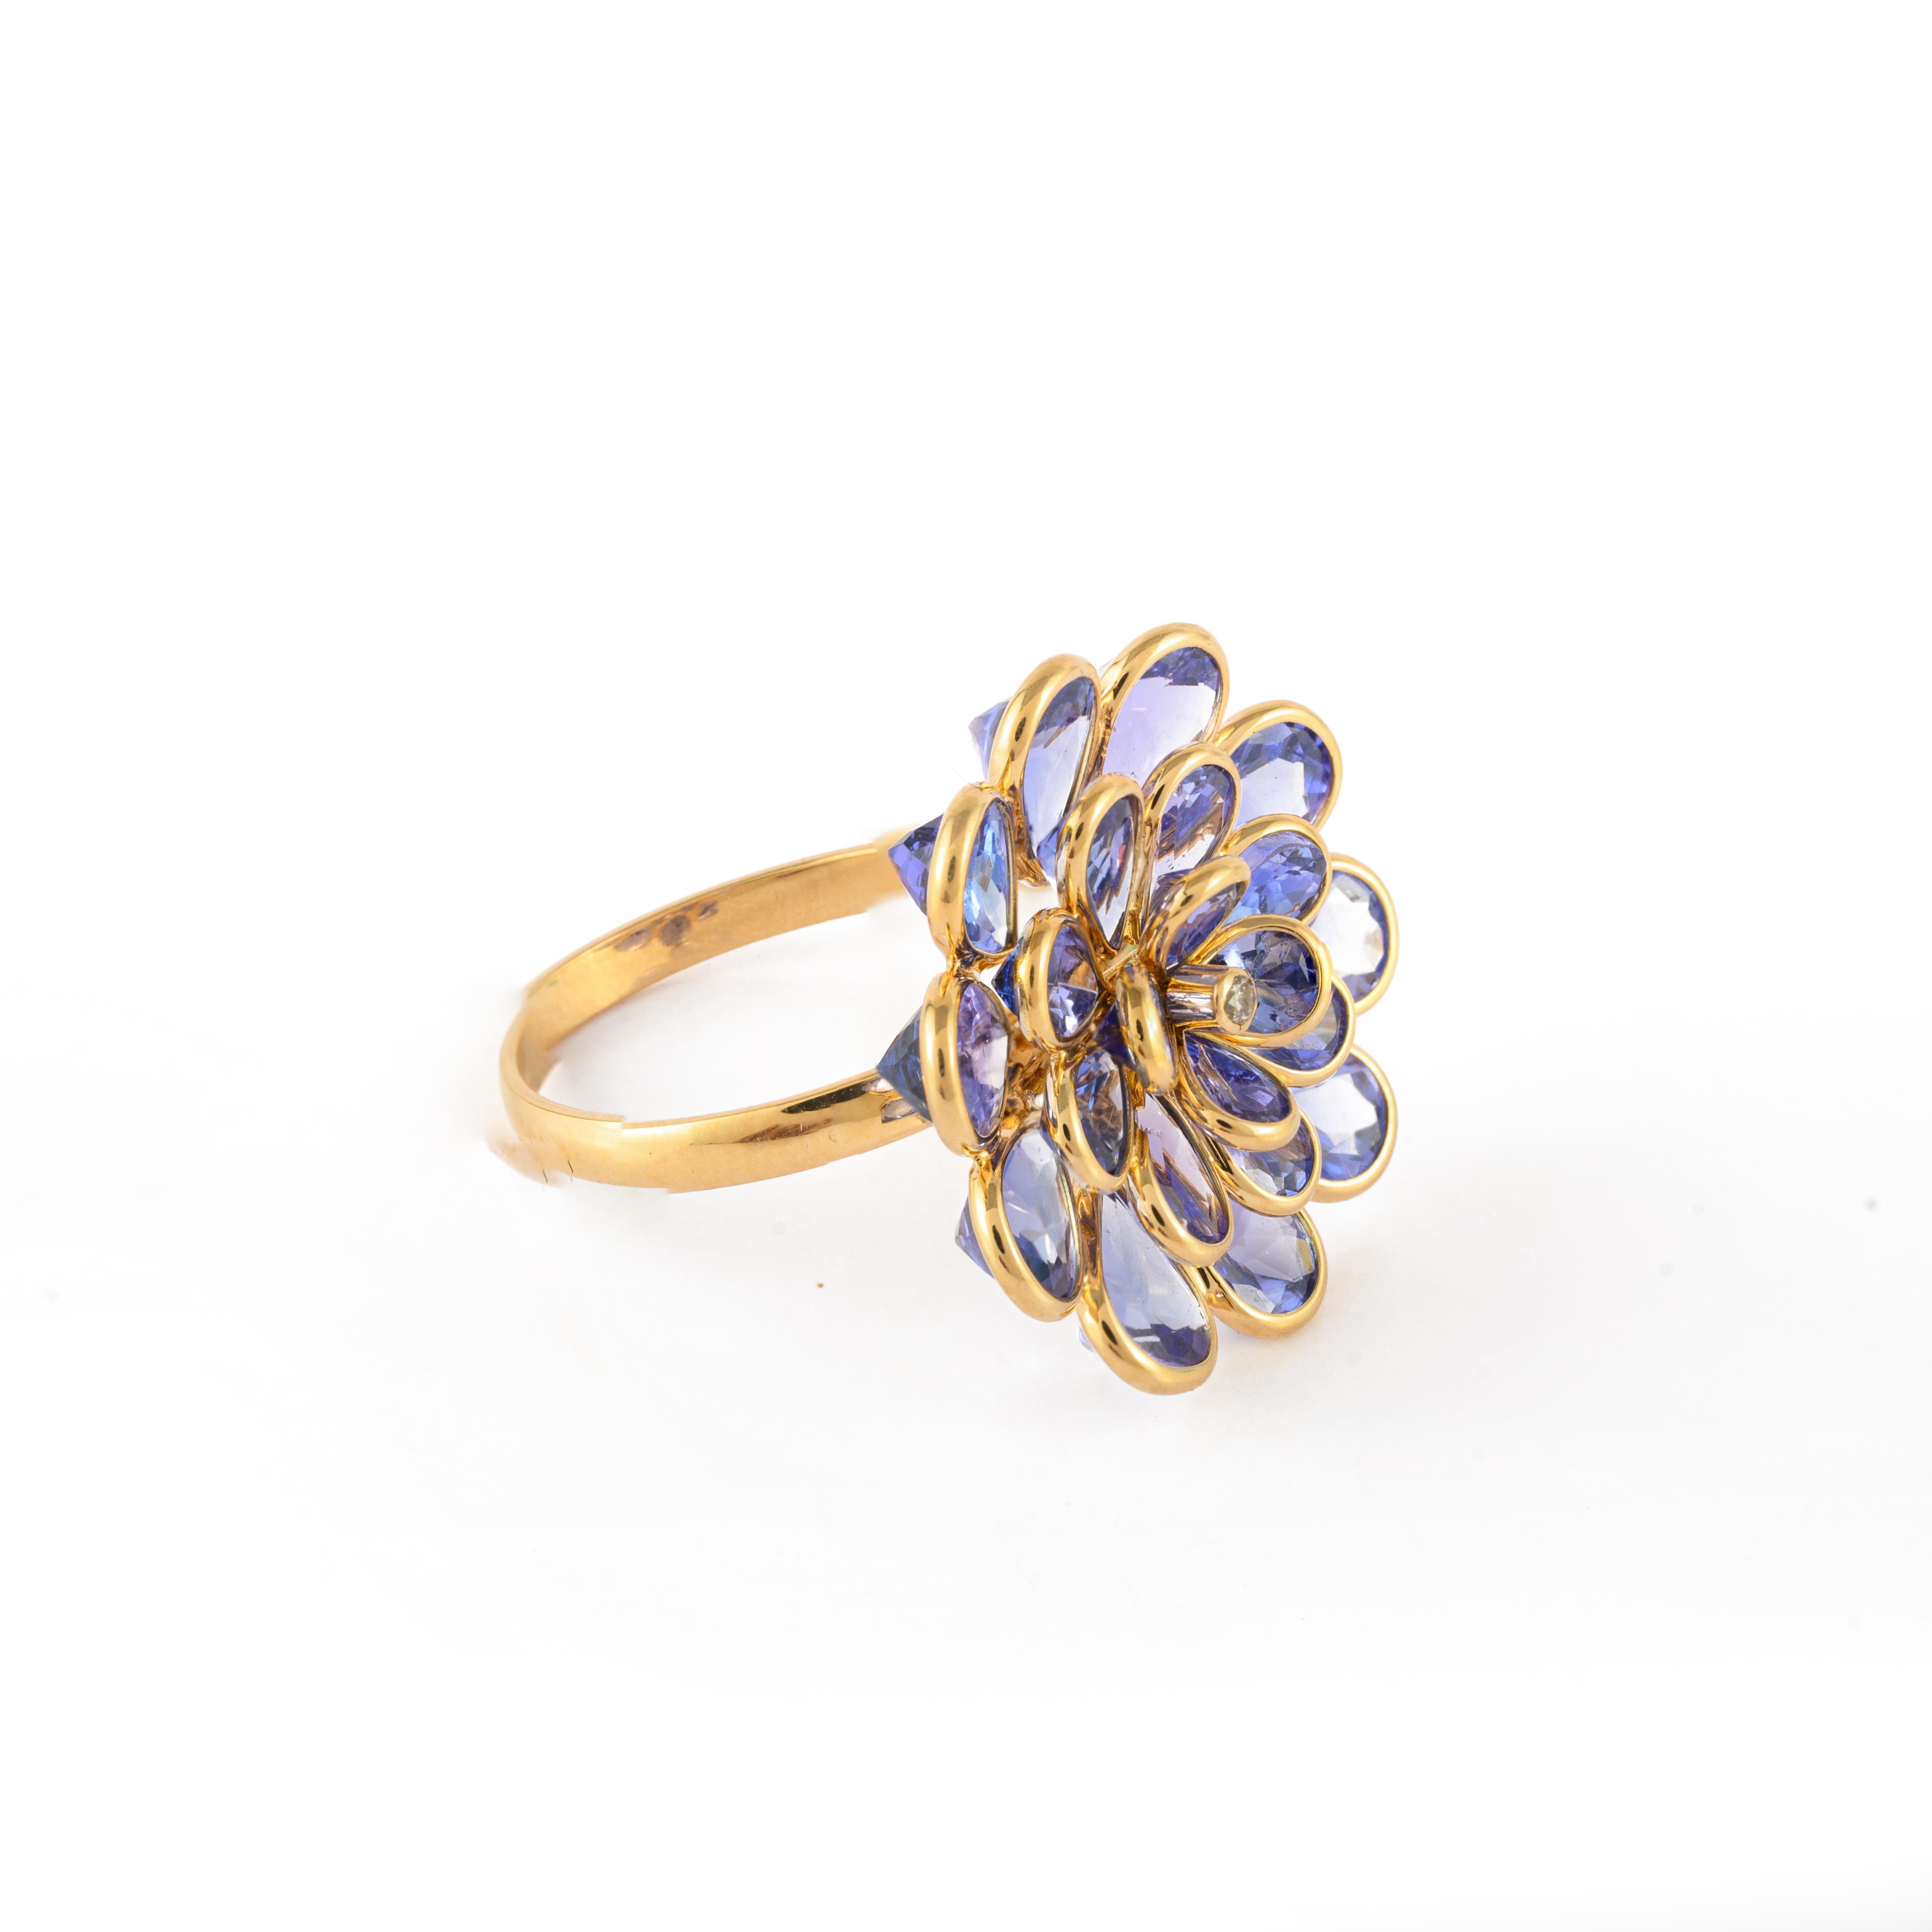 For Sale:  6.26ct Tanzanite Flower Ring with Diamond in 18k Solid Yellow Gold 8